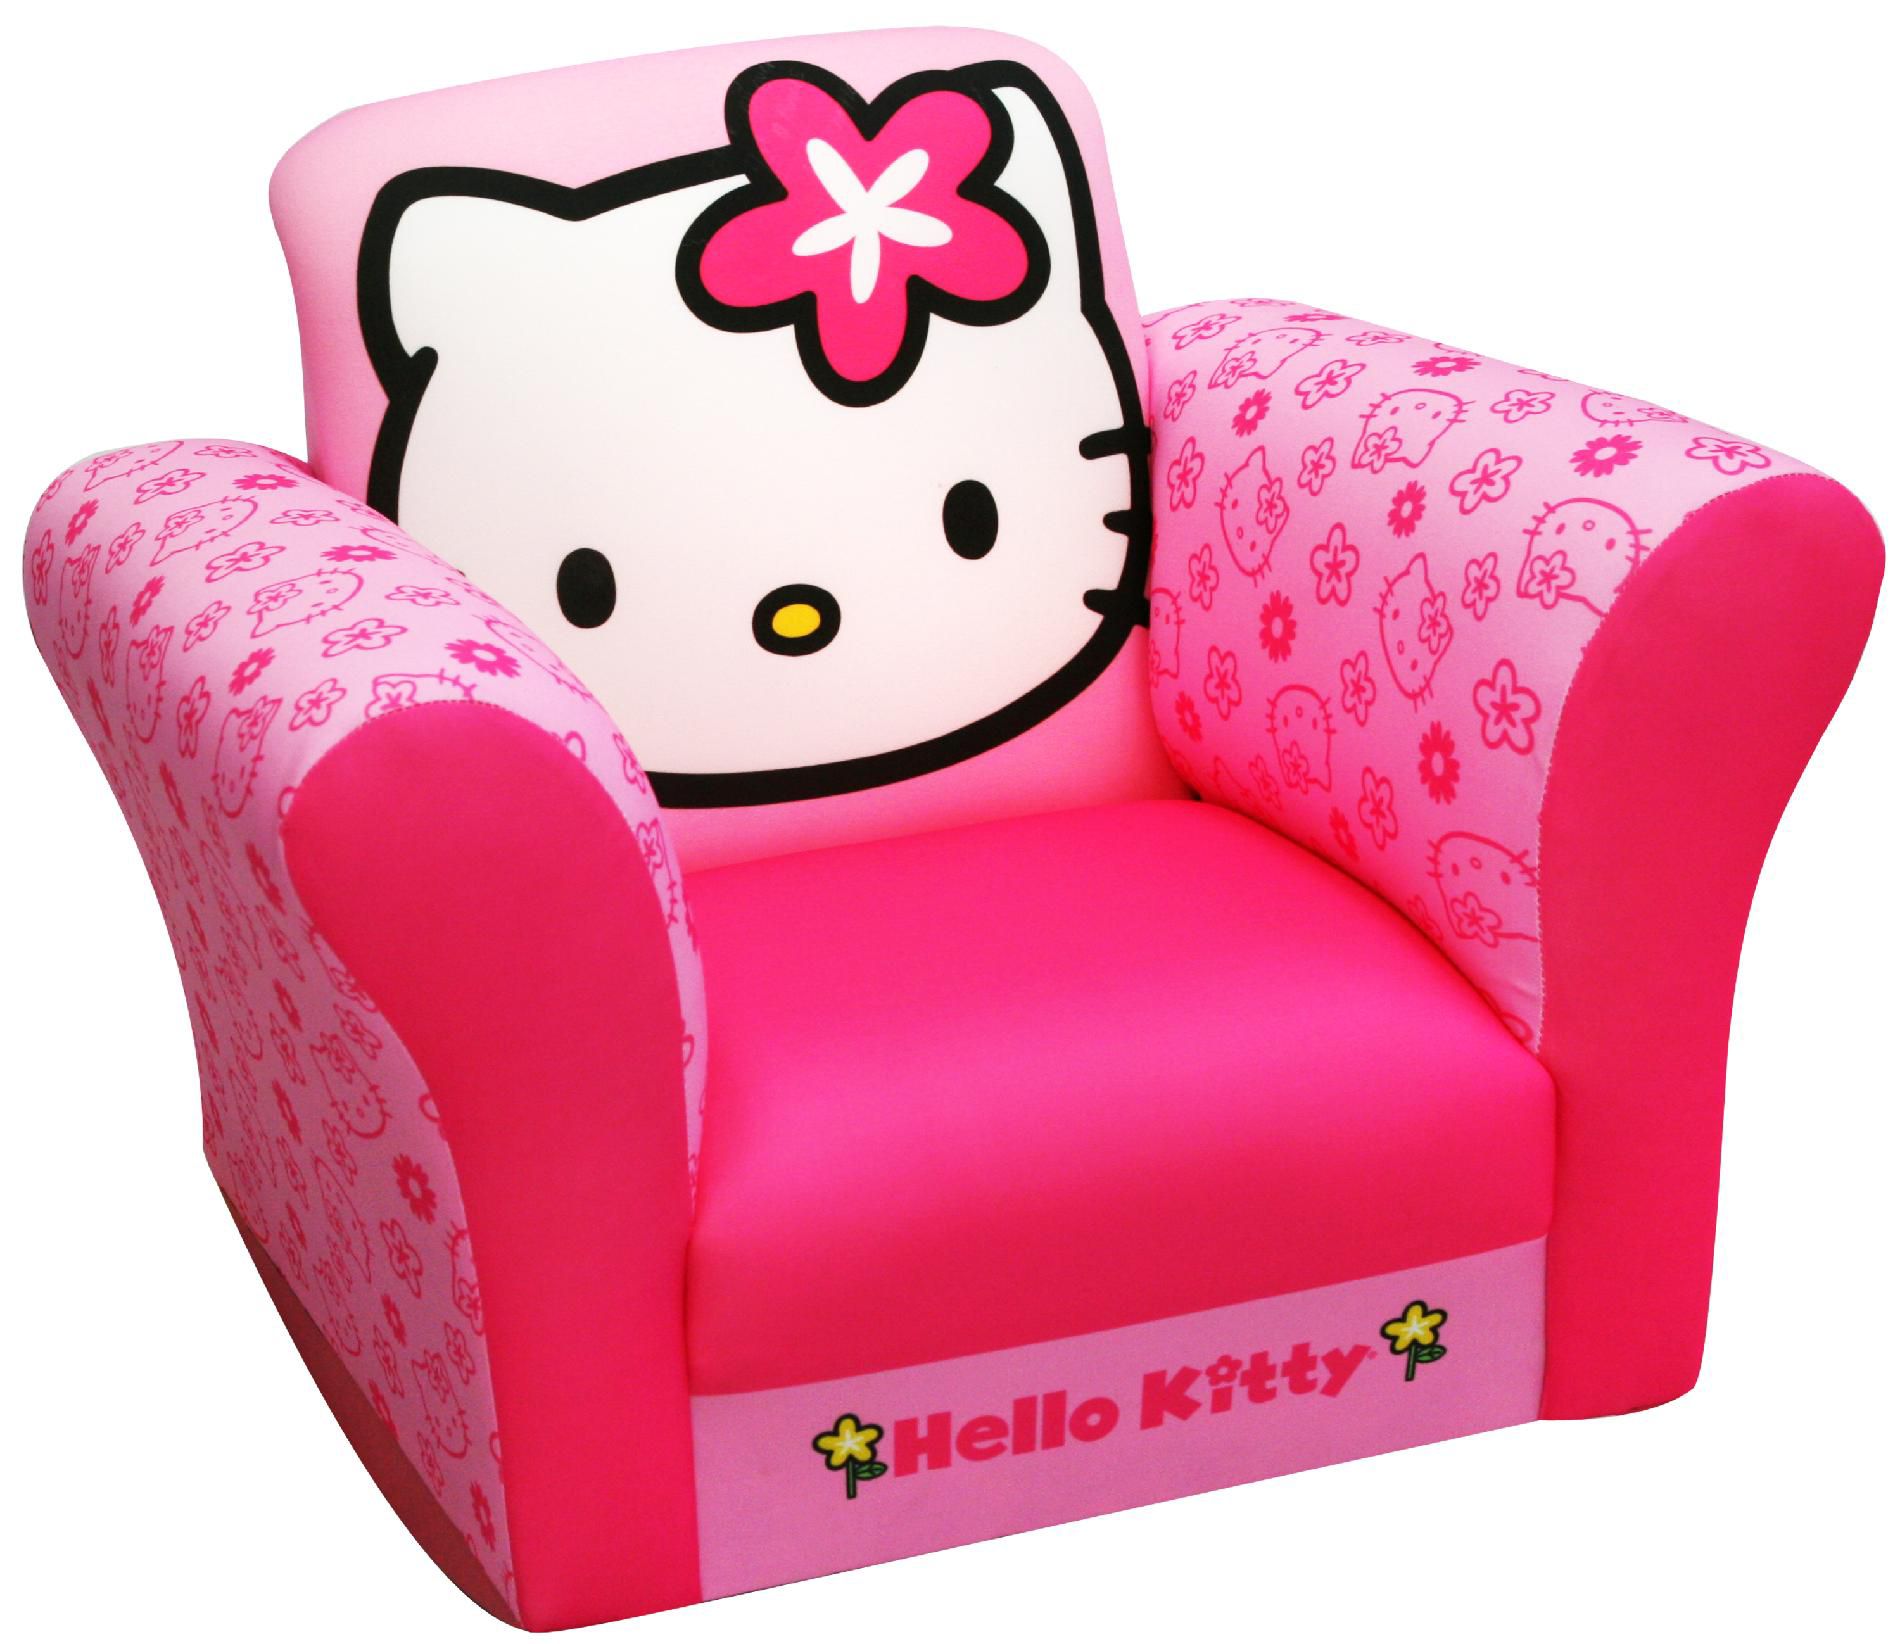 Toddler Furniture: Shop Chairs for Kids'' Rooms at Kmart.